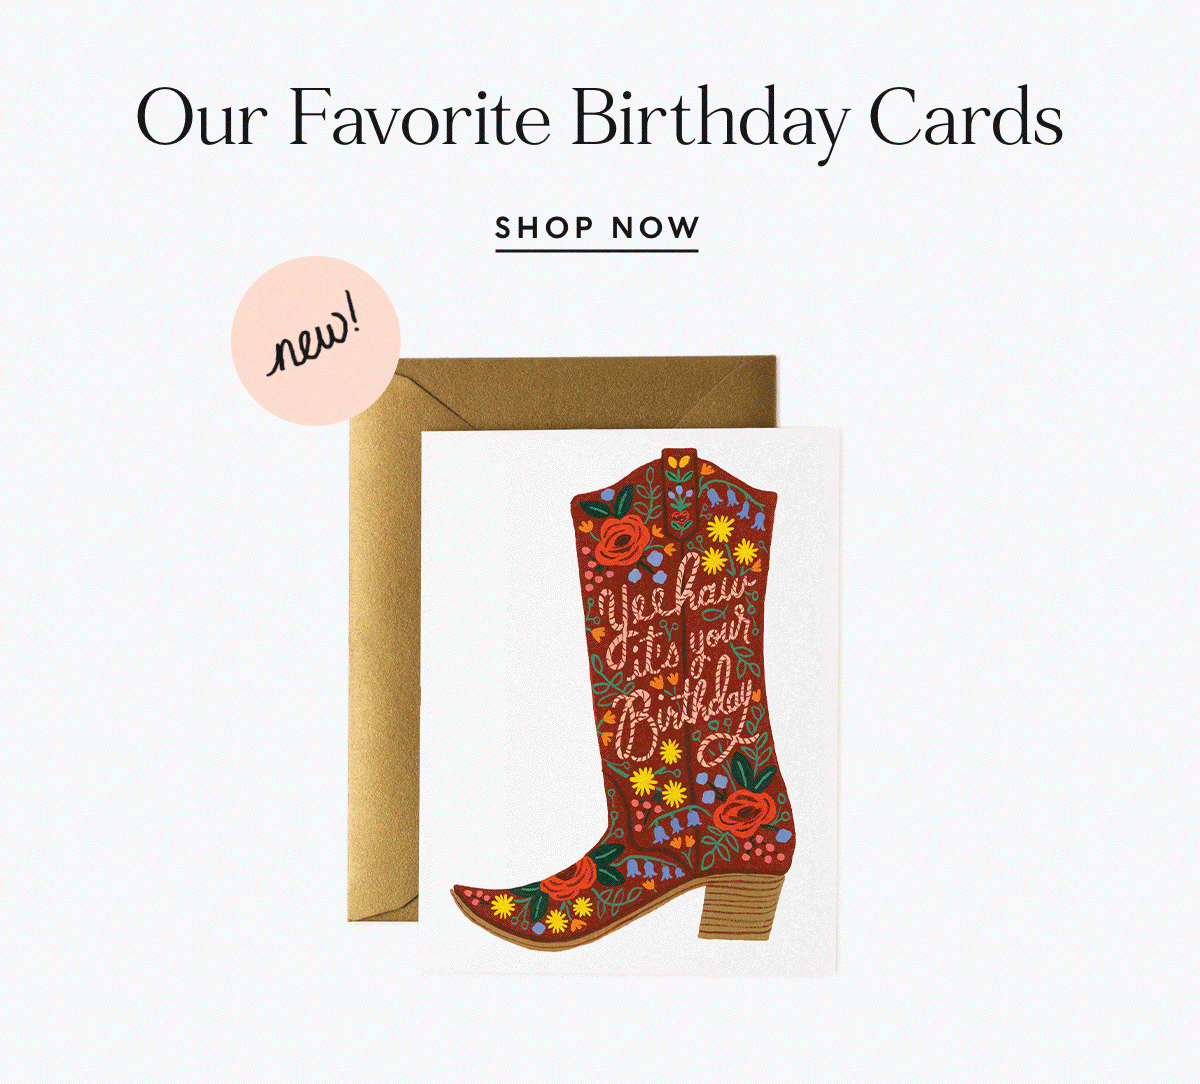 Our favorite birthday cards. Shop now